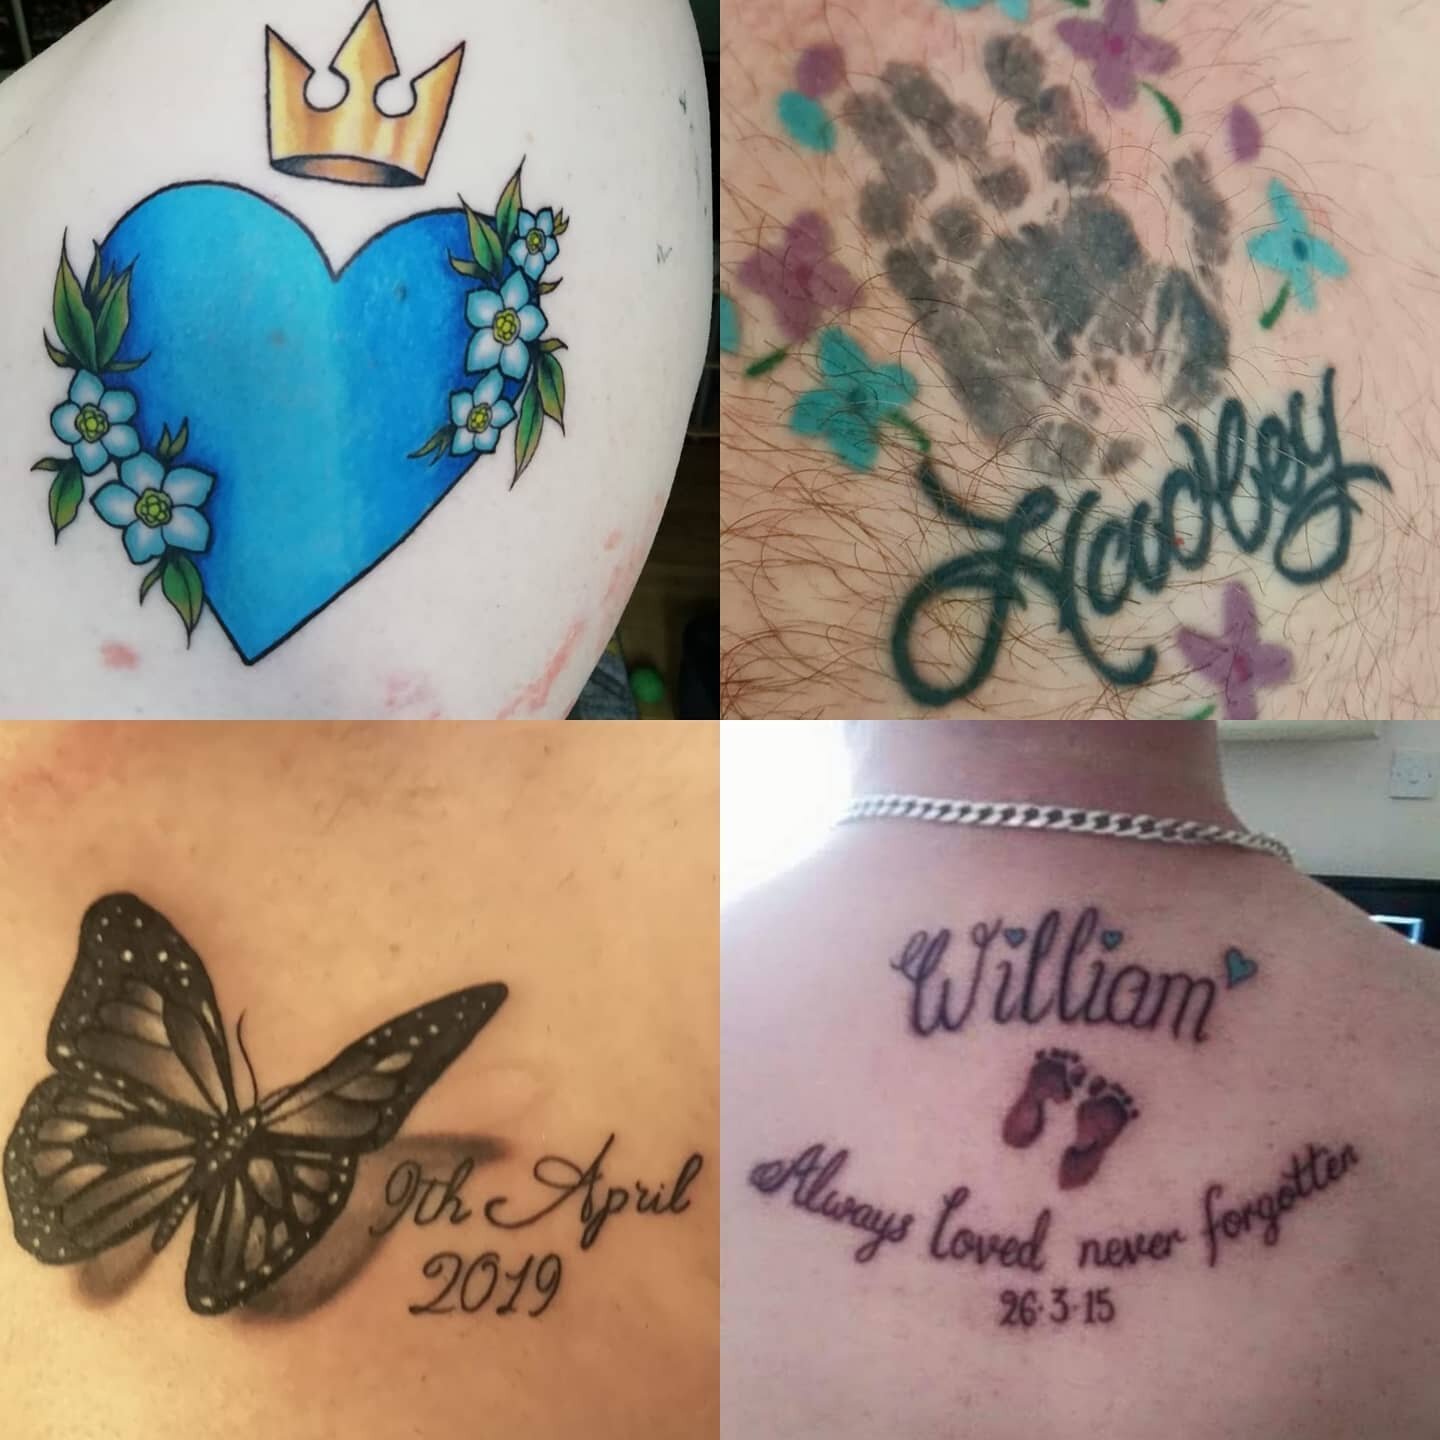 So bit of an odd day to do a post (no game or training to mention), but as it's national tattoo day, we thought we'd share with everyone some of the pieces our players and their other halves have had in tribute to their angels.

Some amazing pieces t